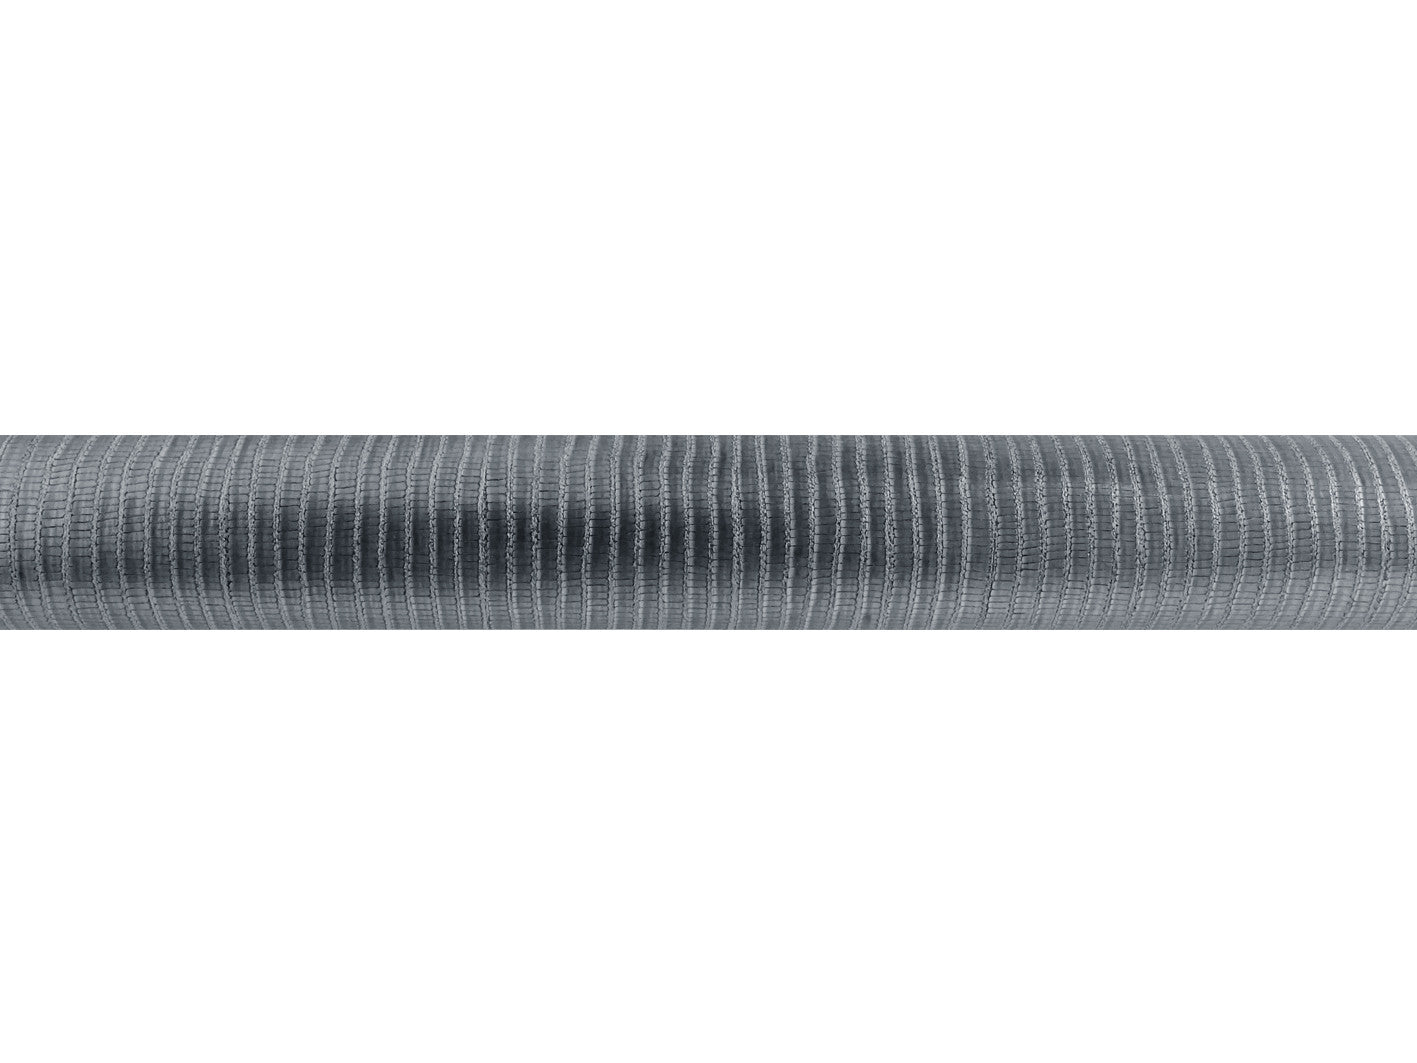 "Zinc" metallic textured 50mm tracked curtain pole by Walcot House